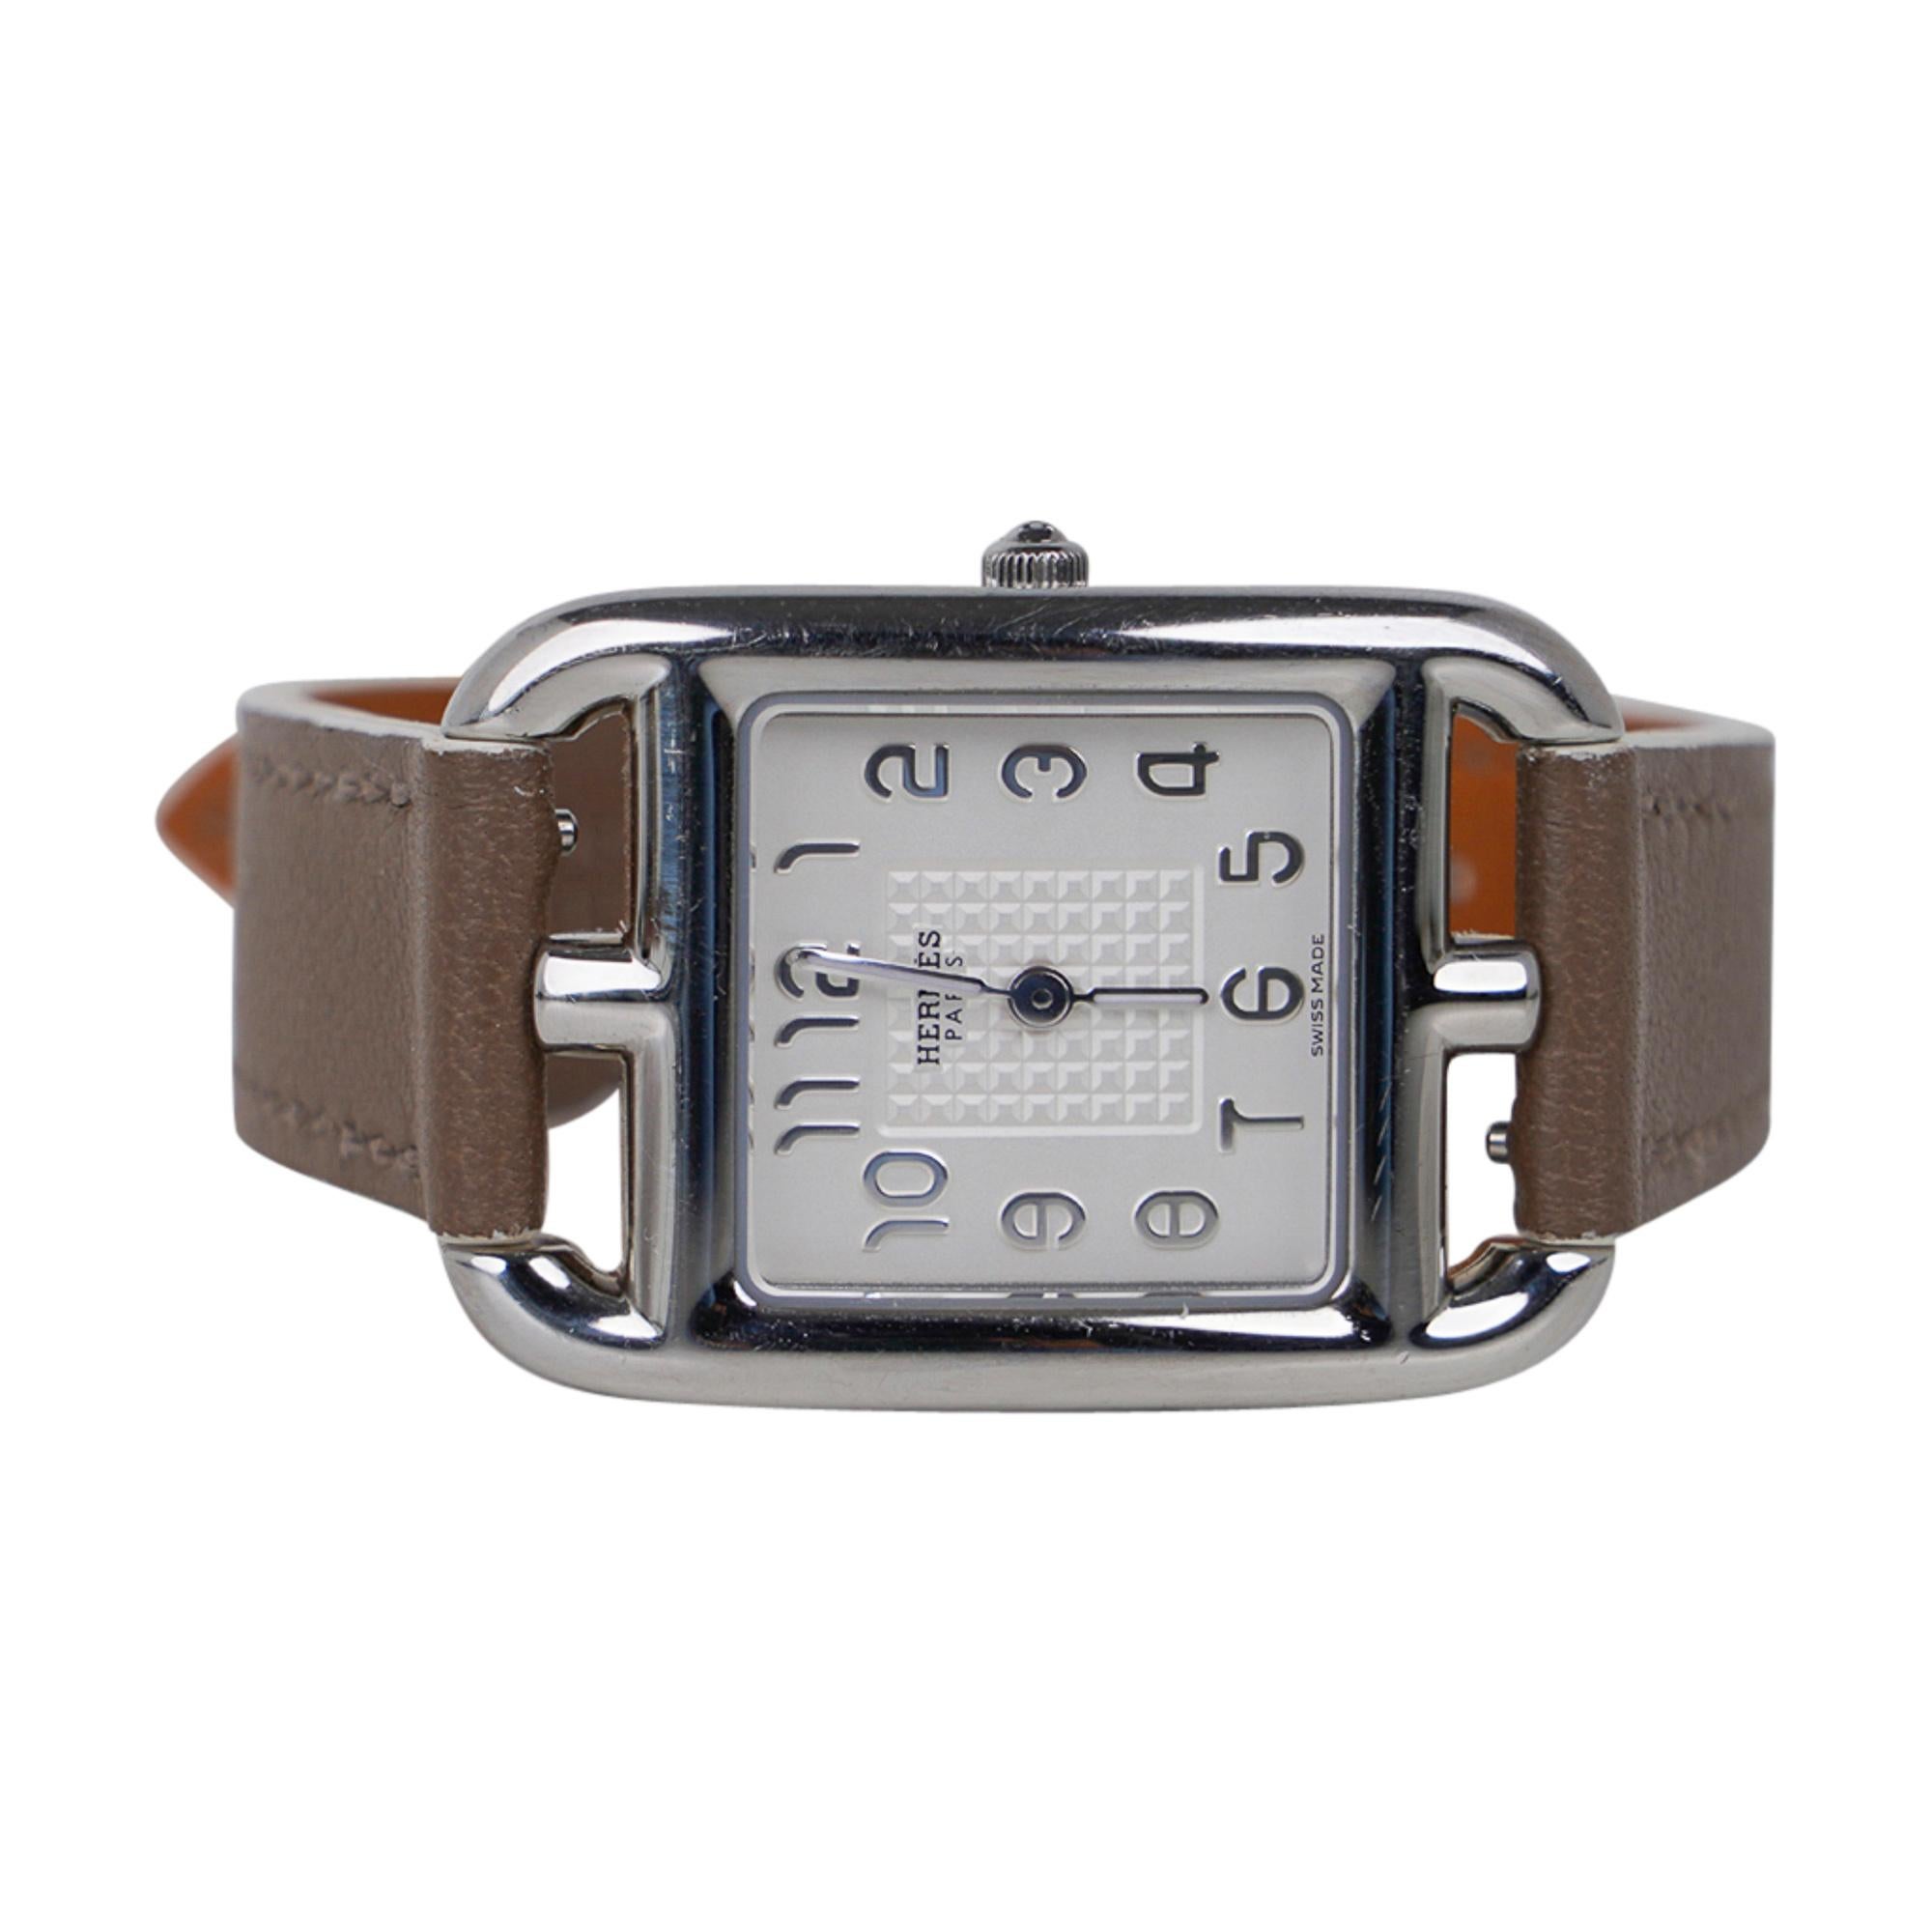 Guaranteed authentic Hermes Cape Cod watch.
The 23 mm x 23 mm steel watch has an opaline silvered dial.
The interchangeable strap is Etoupe calfskin.
Quartz movement made in Switzerland.
The Cape Cod was inspired by the rectangular Chaine d'Ancre